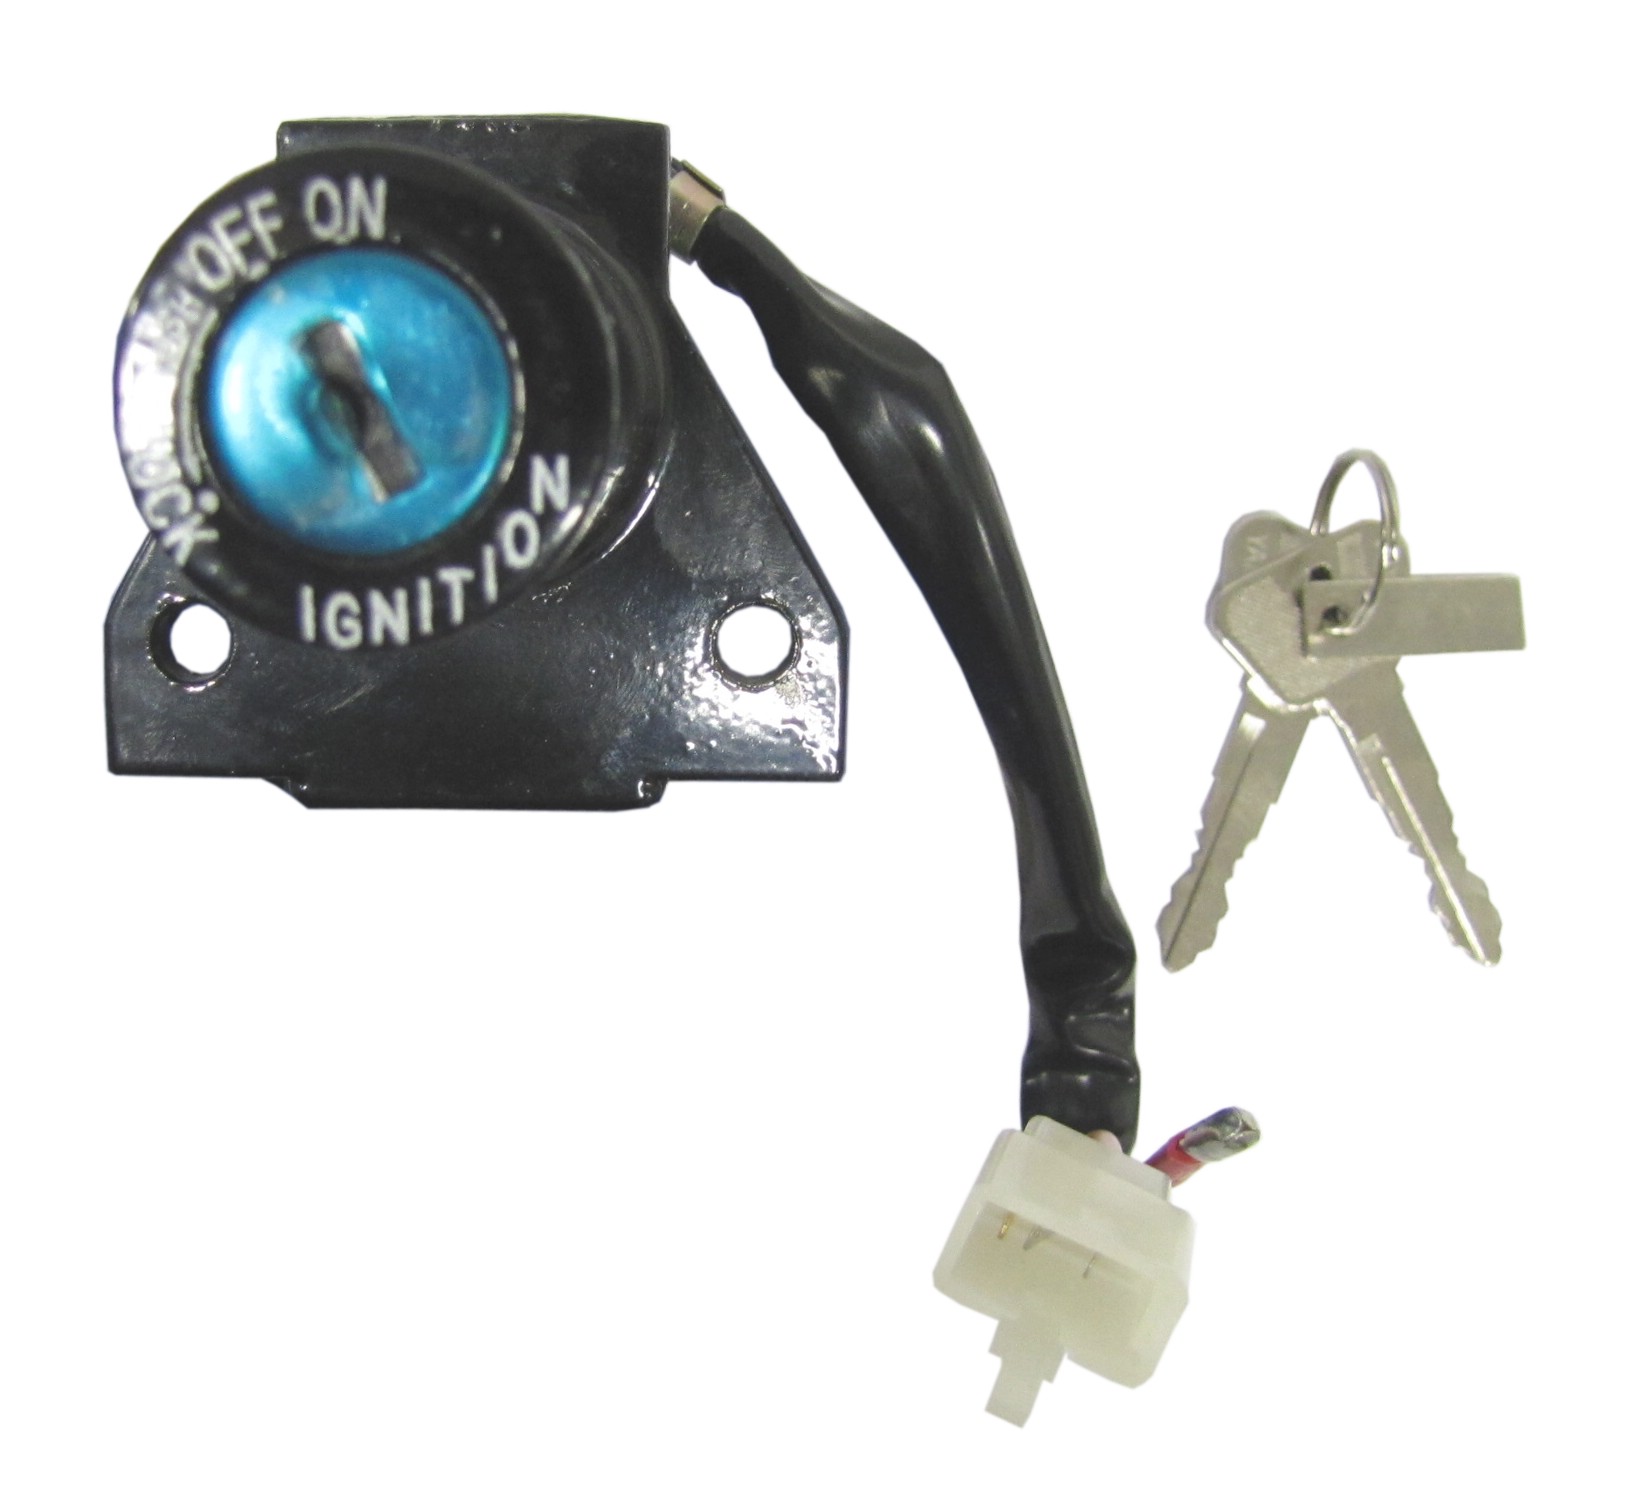 YAMAHA YBR125 2007-2014 INJECTION (4 WIRES) IGNITION SWITCH